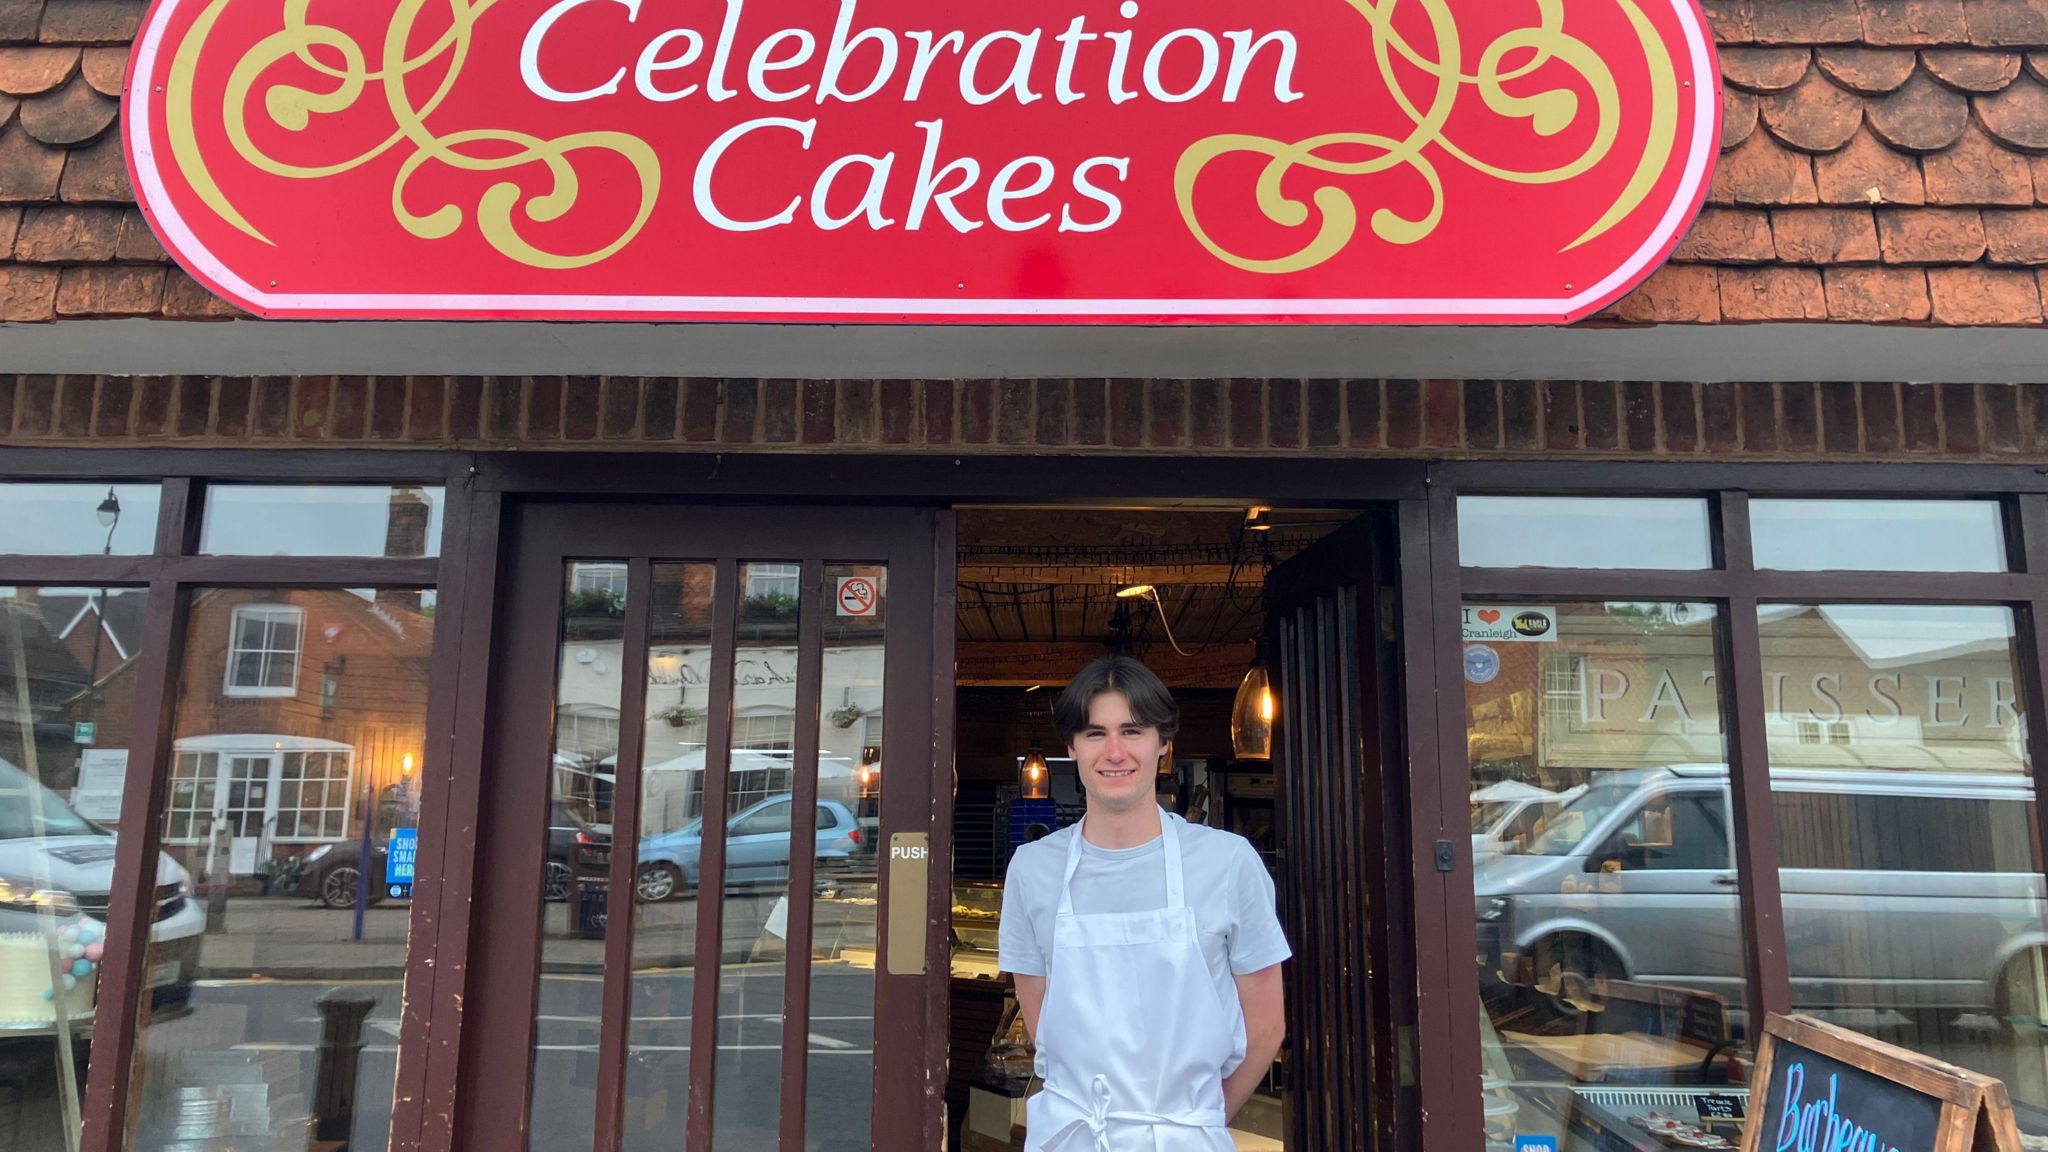 Curtis outside Celebration Cakes in Cranleigh